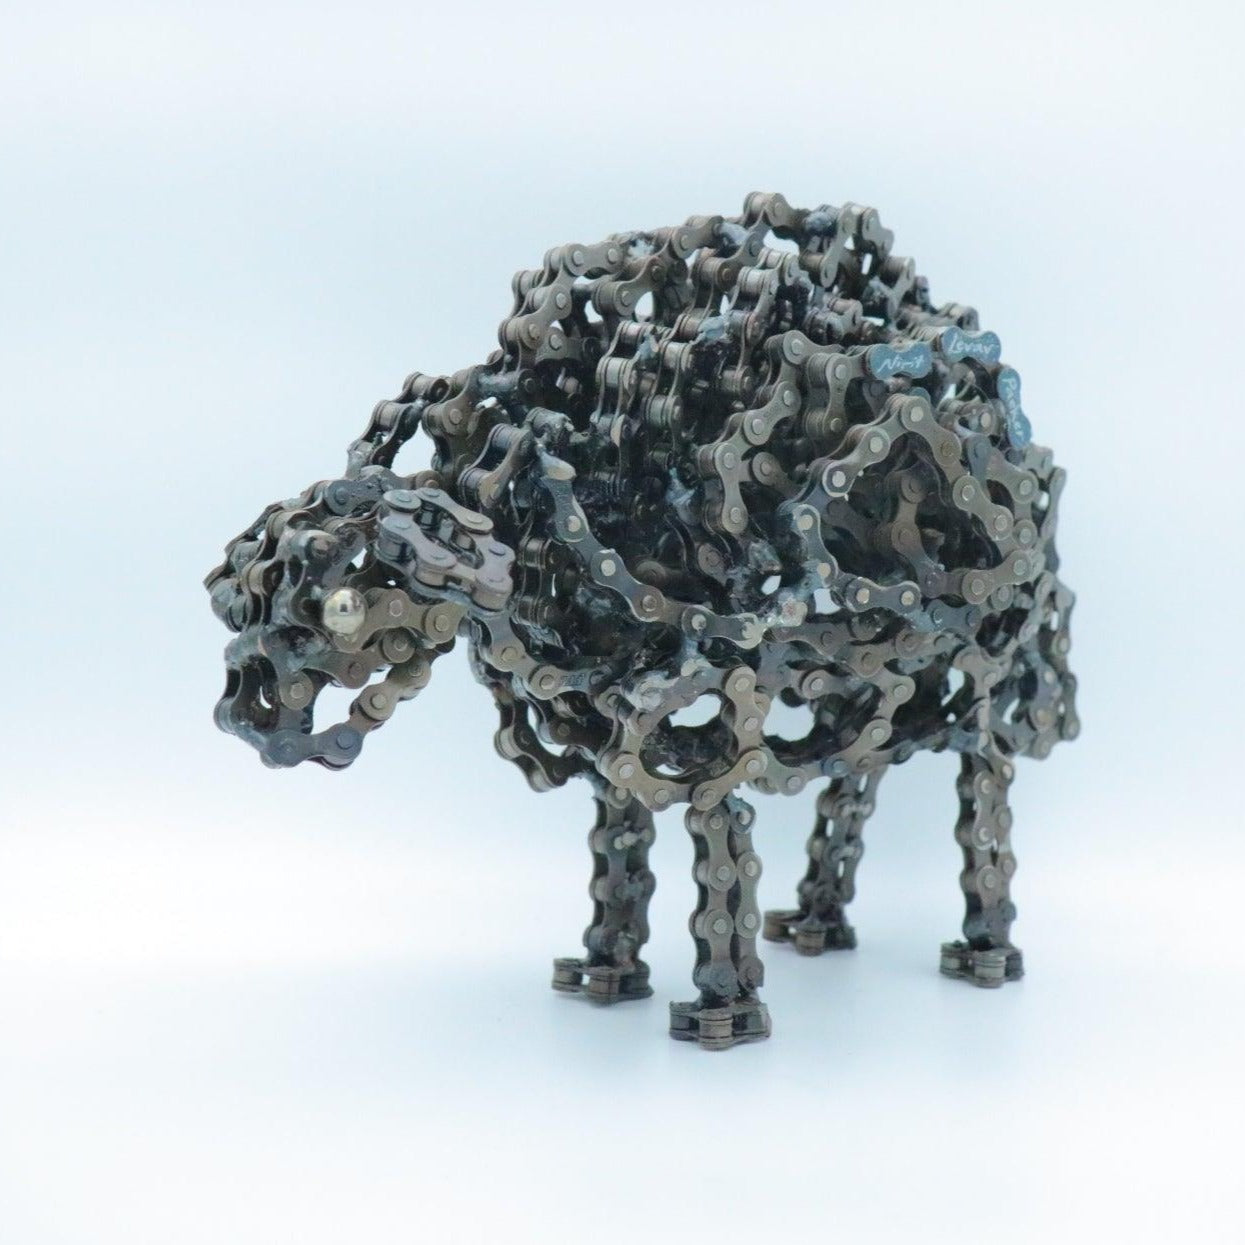 Sheep Sculpture | UNCHAINED by NIRIT LEVAV PACKER